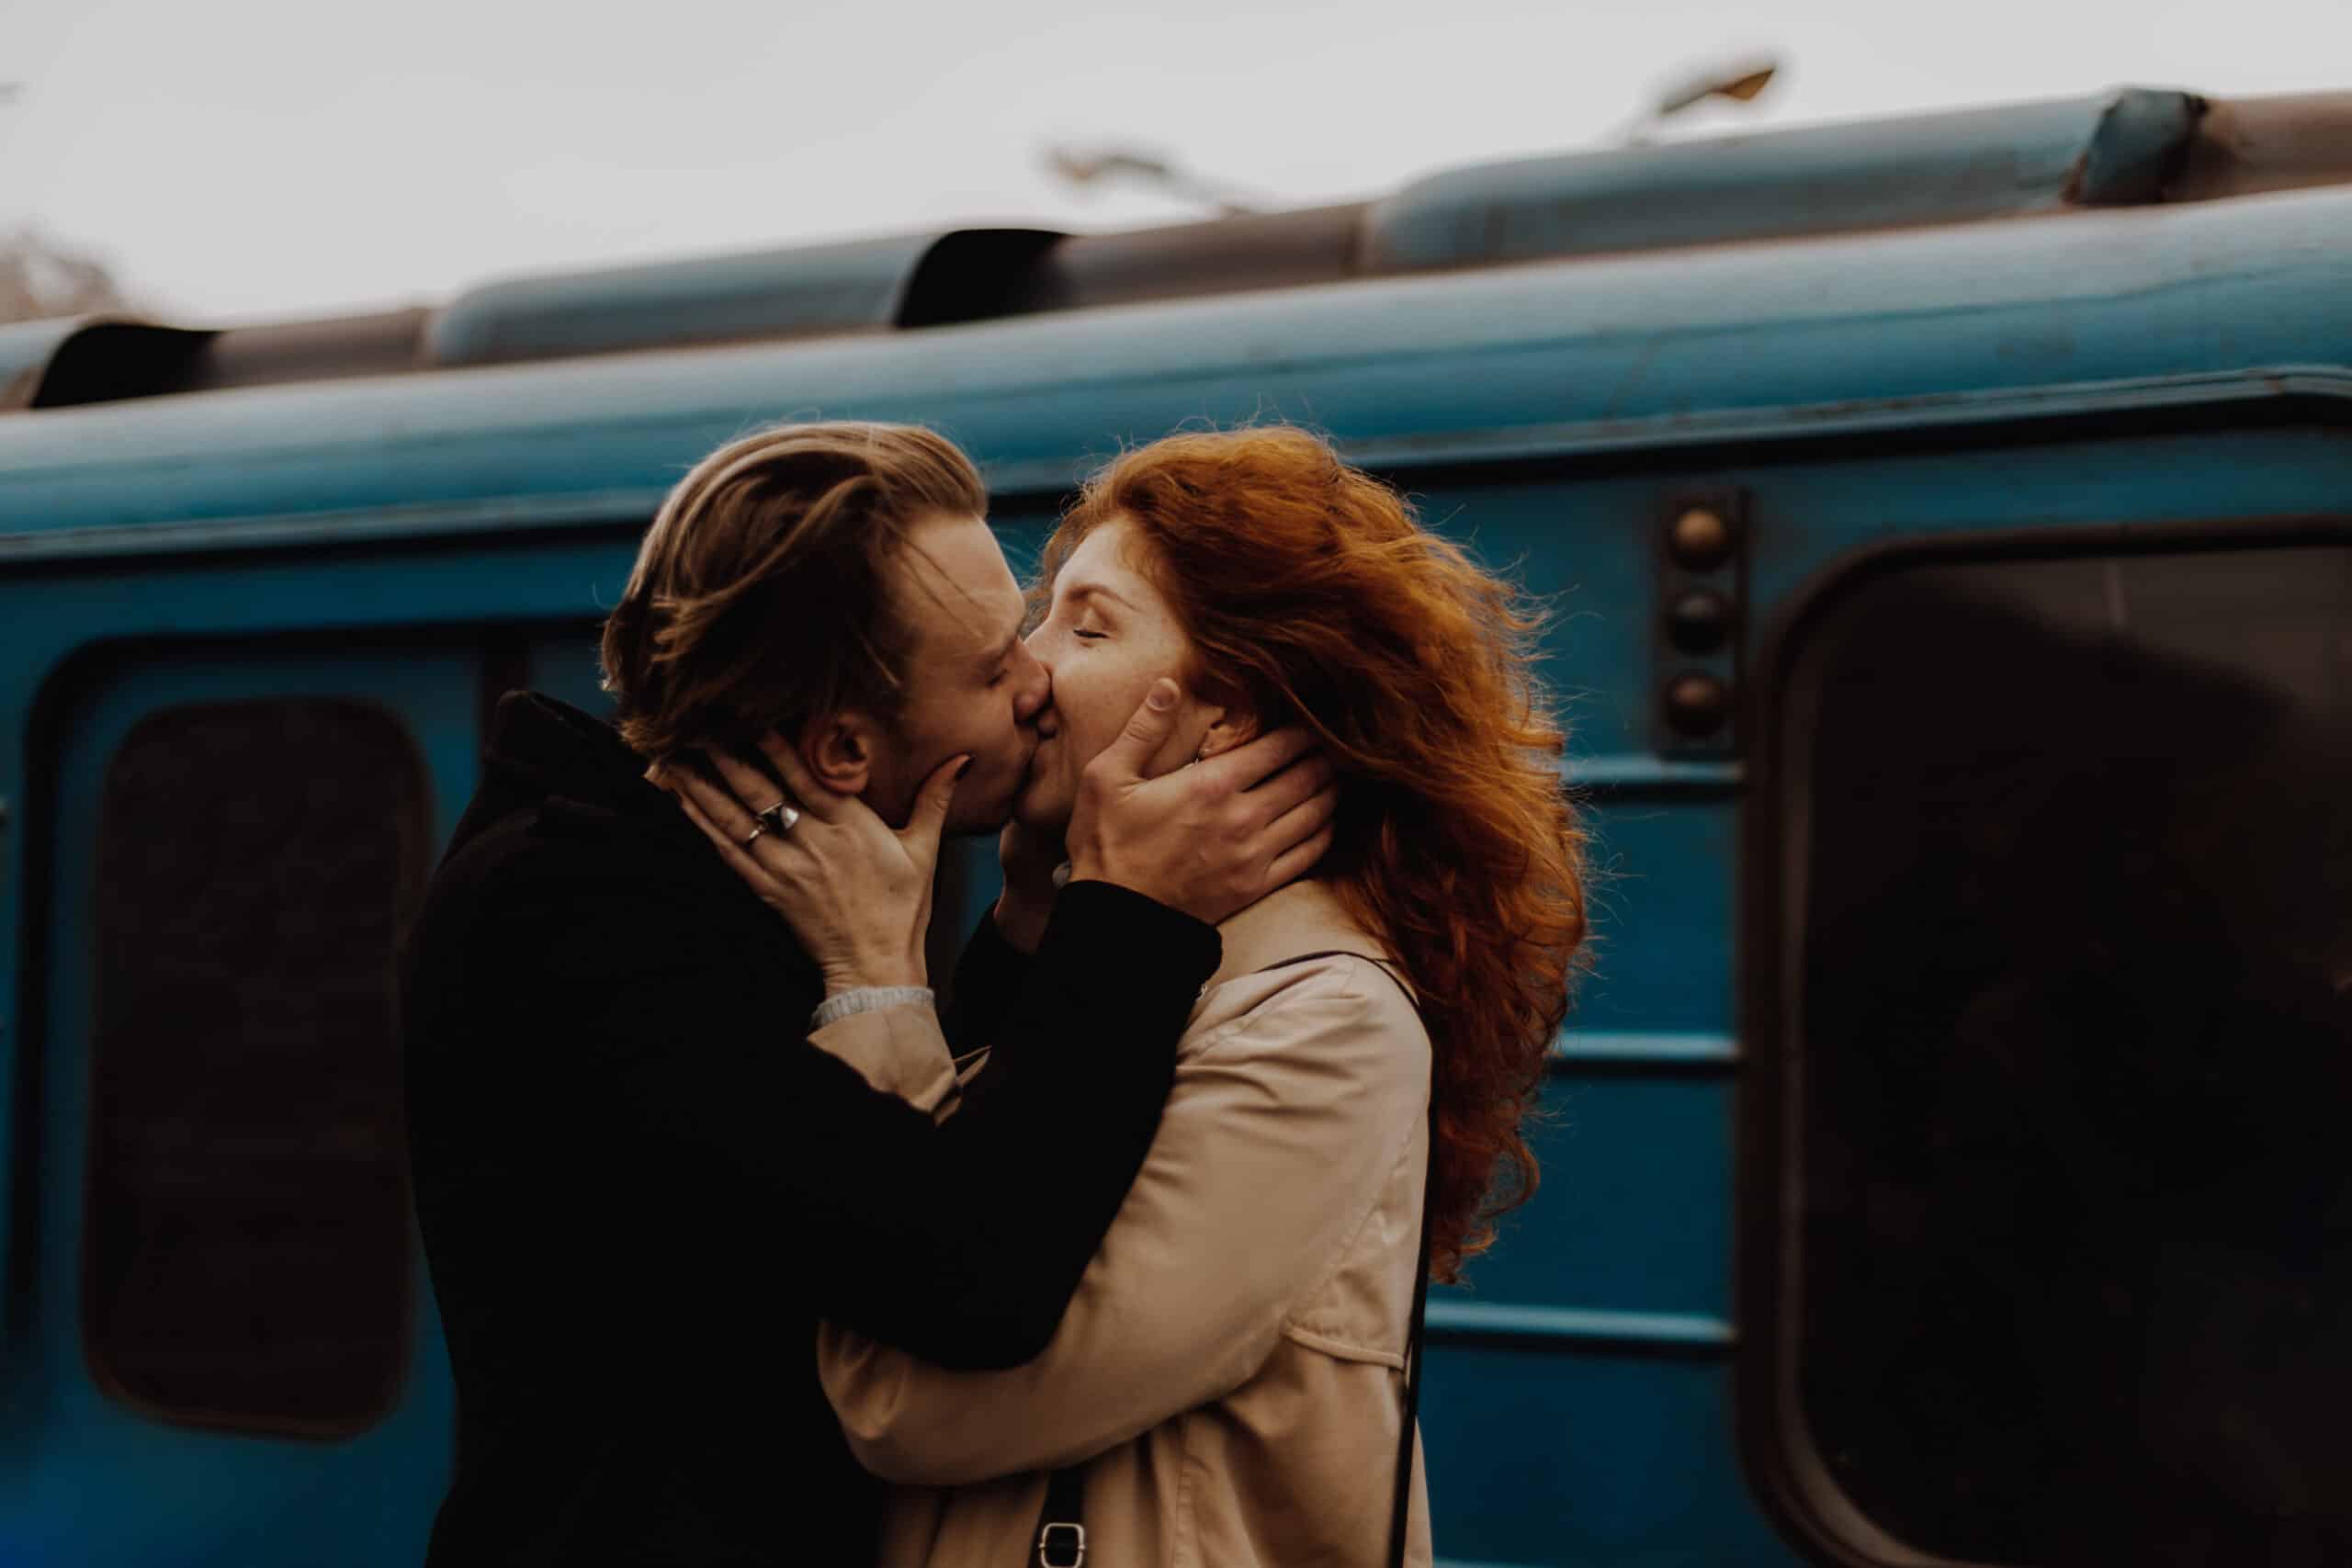 Young couple in love kissing against train in train station.